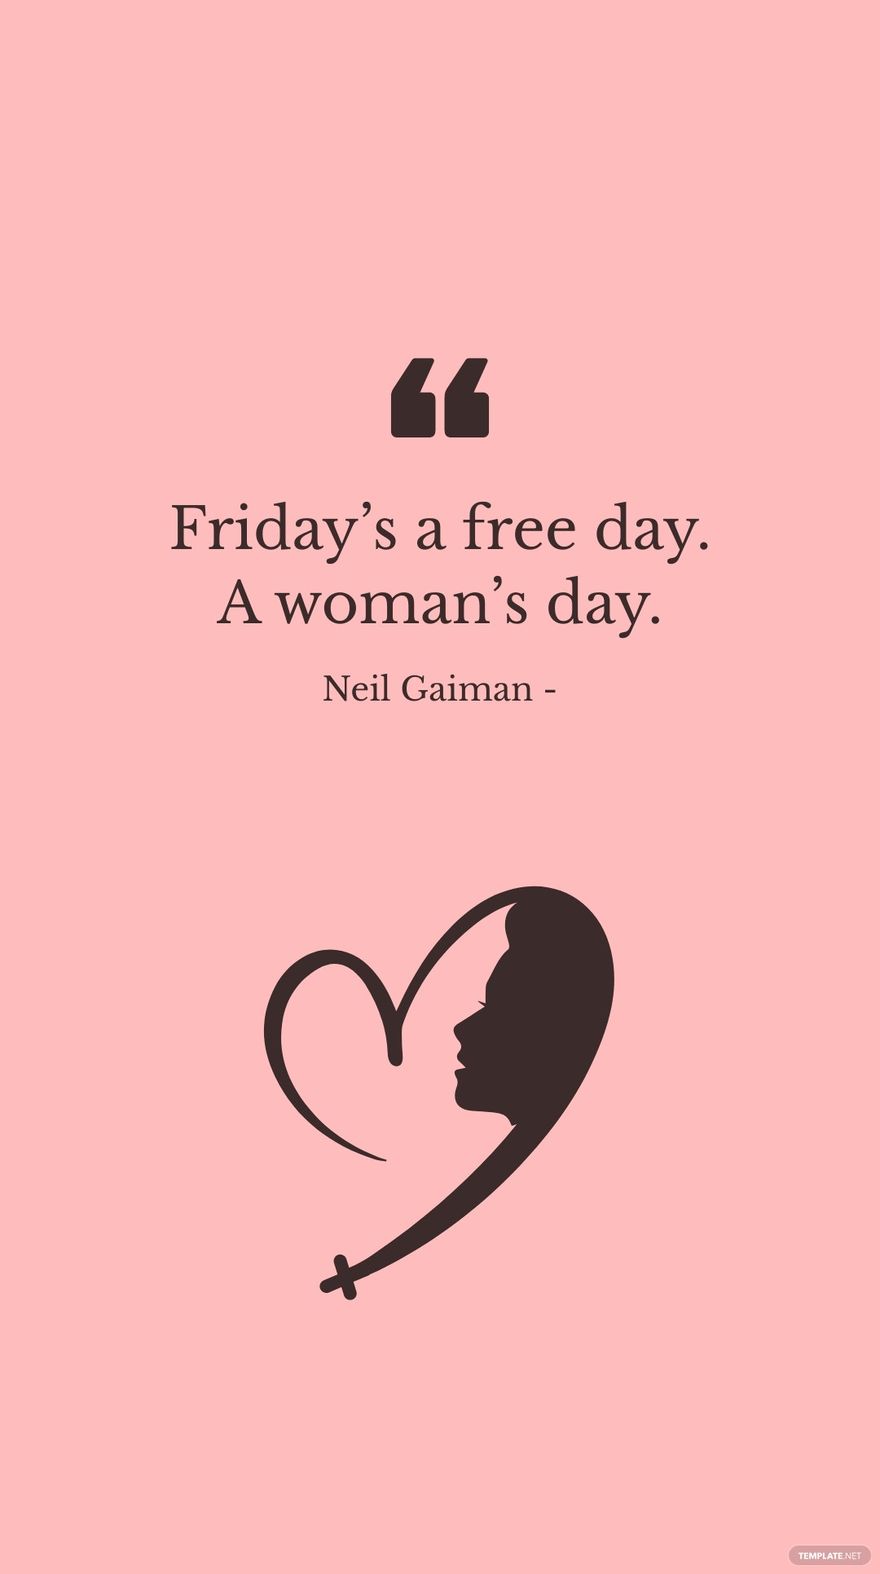 Neil Gaiman - Friday’s a day. A woman’s day. in JPG